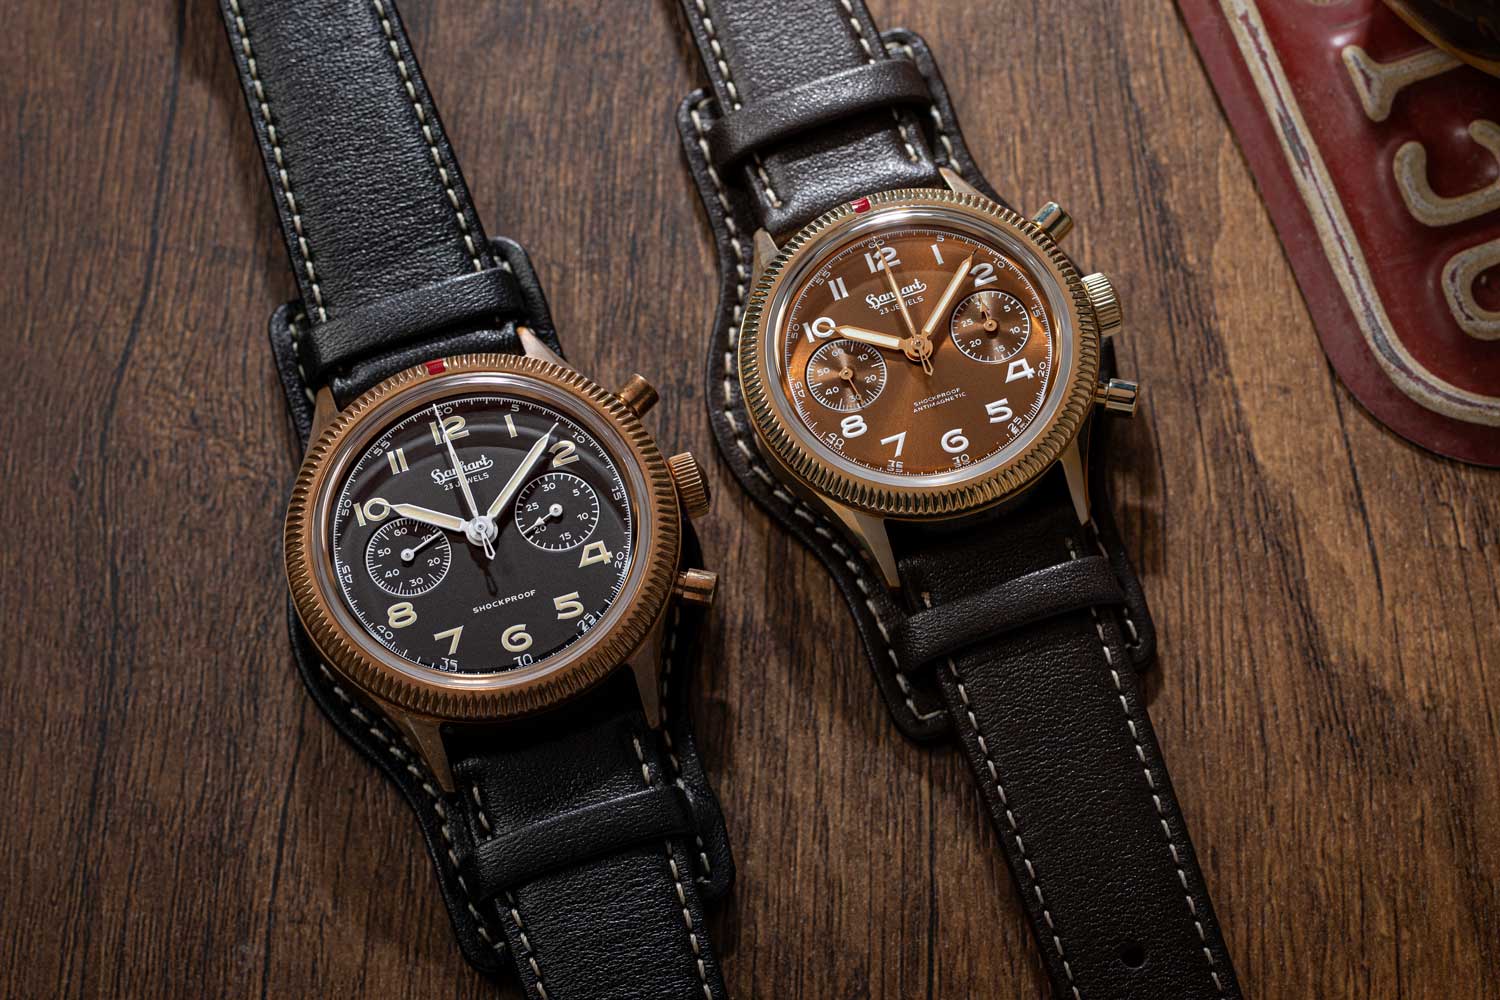 From left: The Hanhart x The Rake & Revolution Limited Edition Bronze 417 Chronograph and this year's brand new Hanhart 417 Chronograph Edition No. 2 "Copperhead" for Revolution & The Rake (Image: Revolution©)